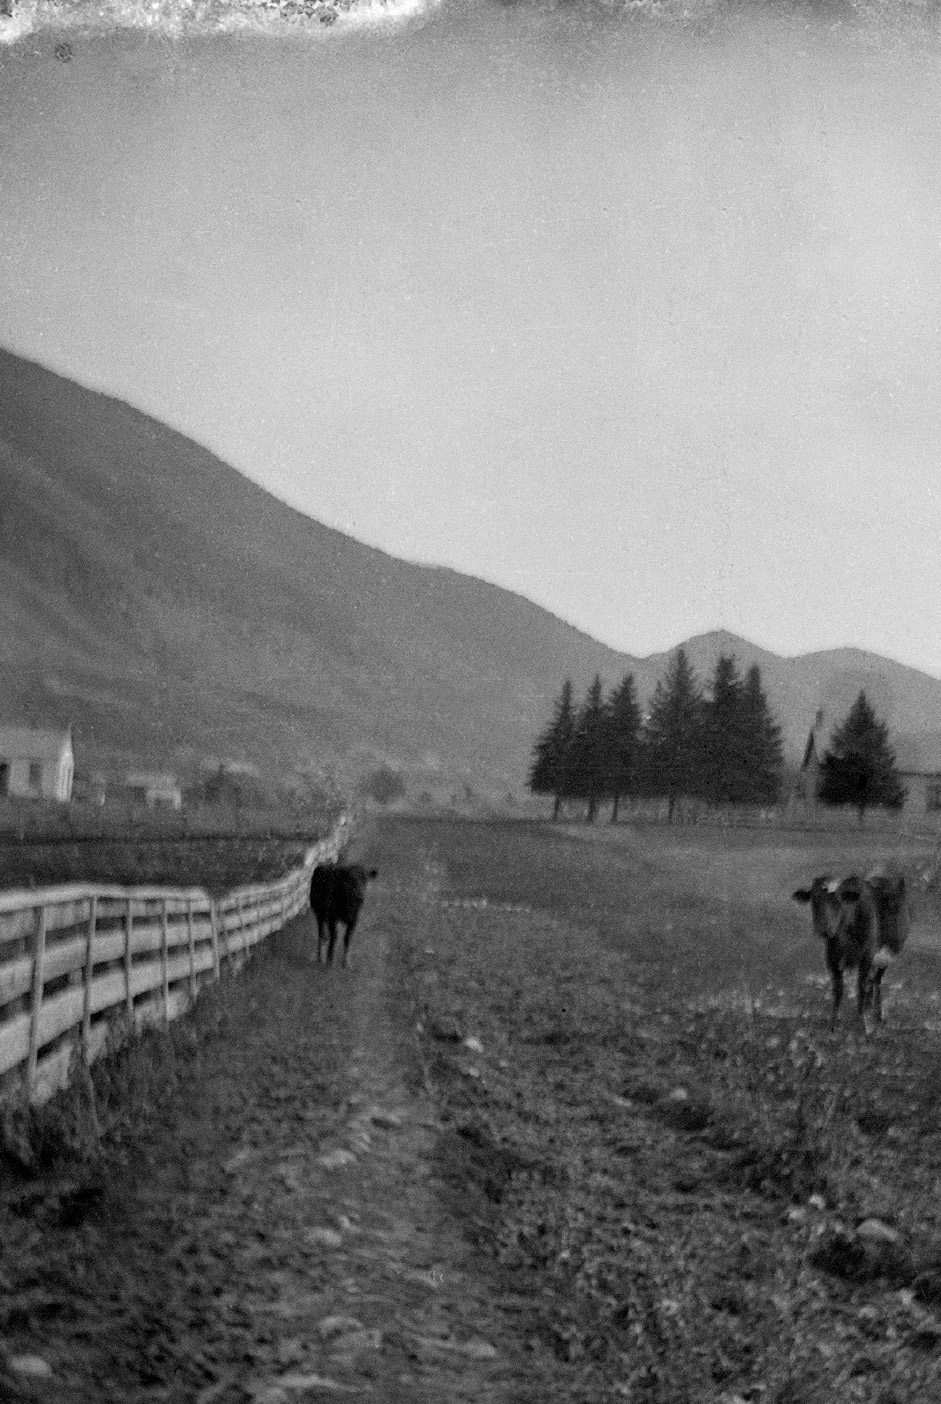 A black and white image of a field with a fence and cows with the provo mountains in the background